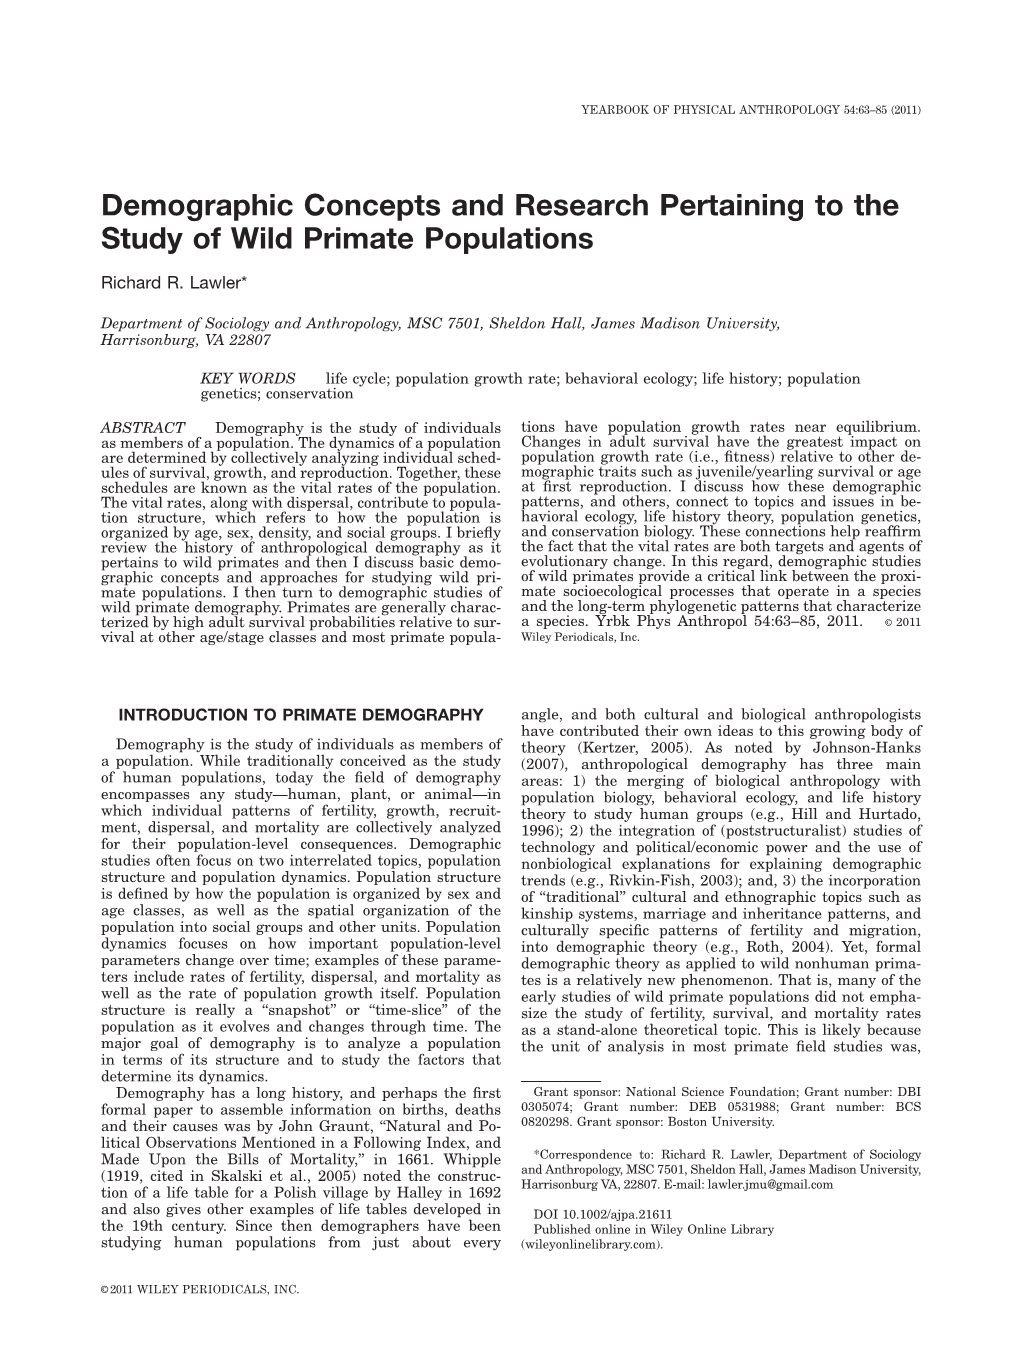 Demographic Concepts and Research Pertaining to the Study of Wild Primate Populations Richard R